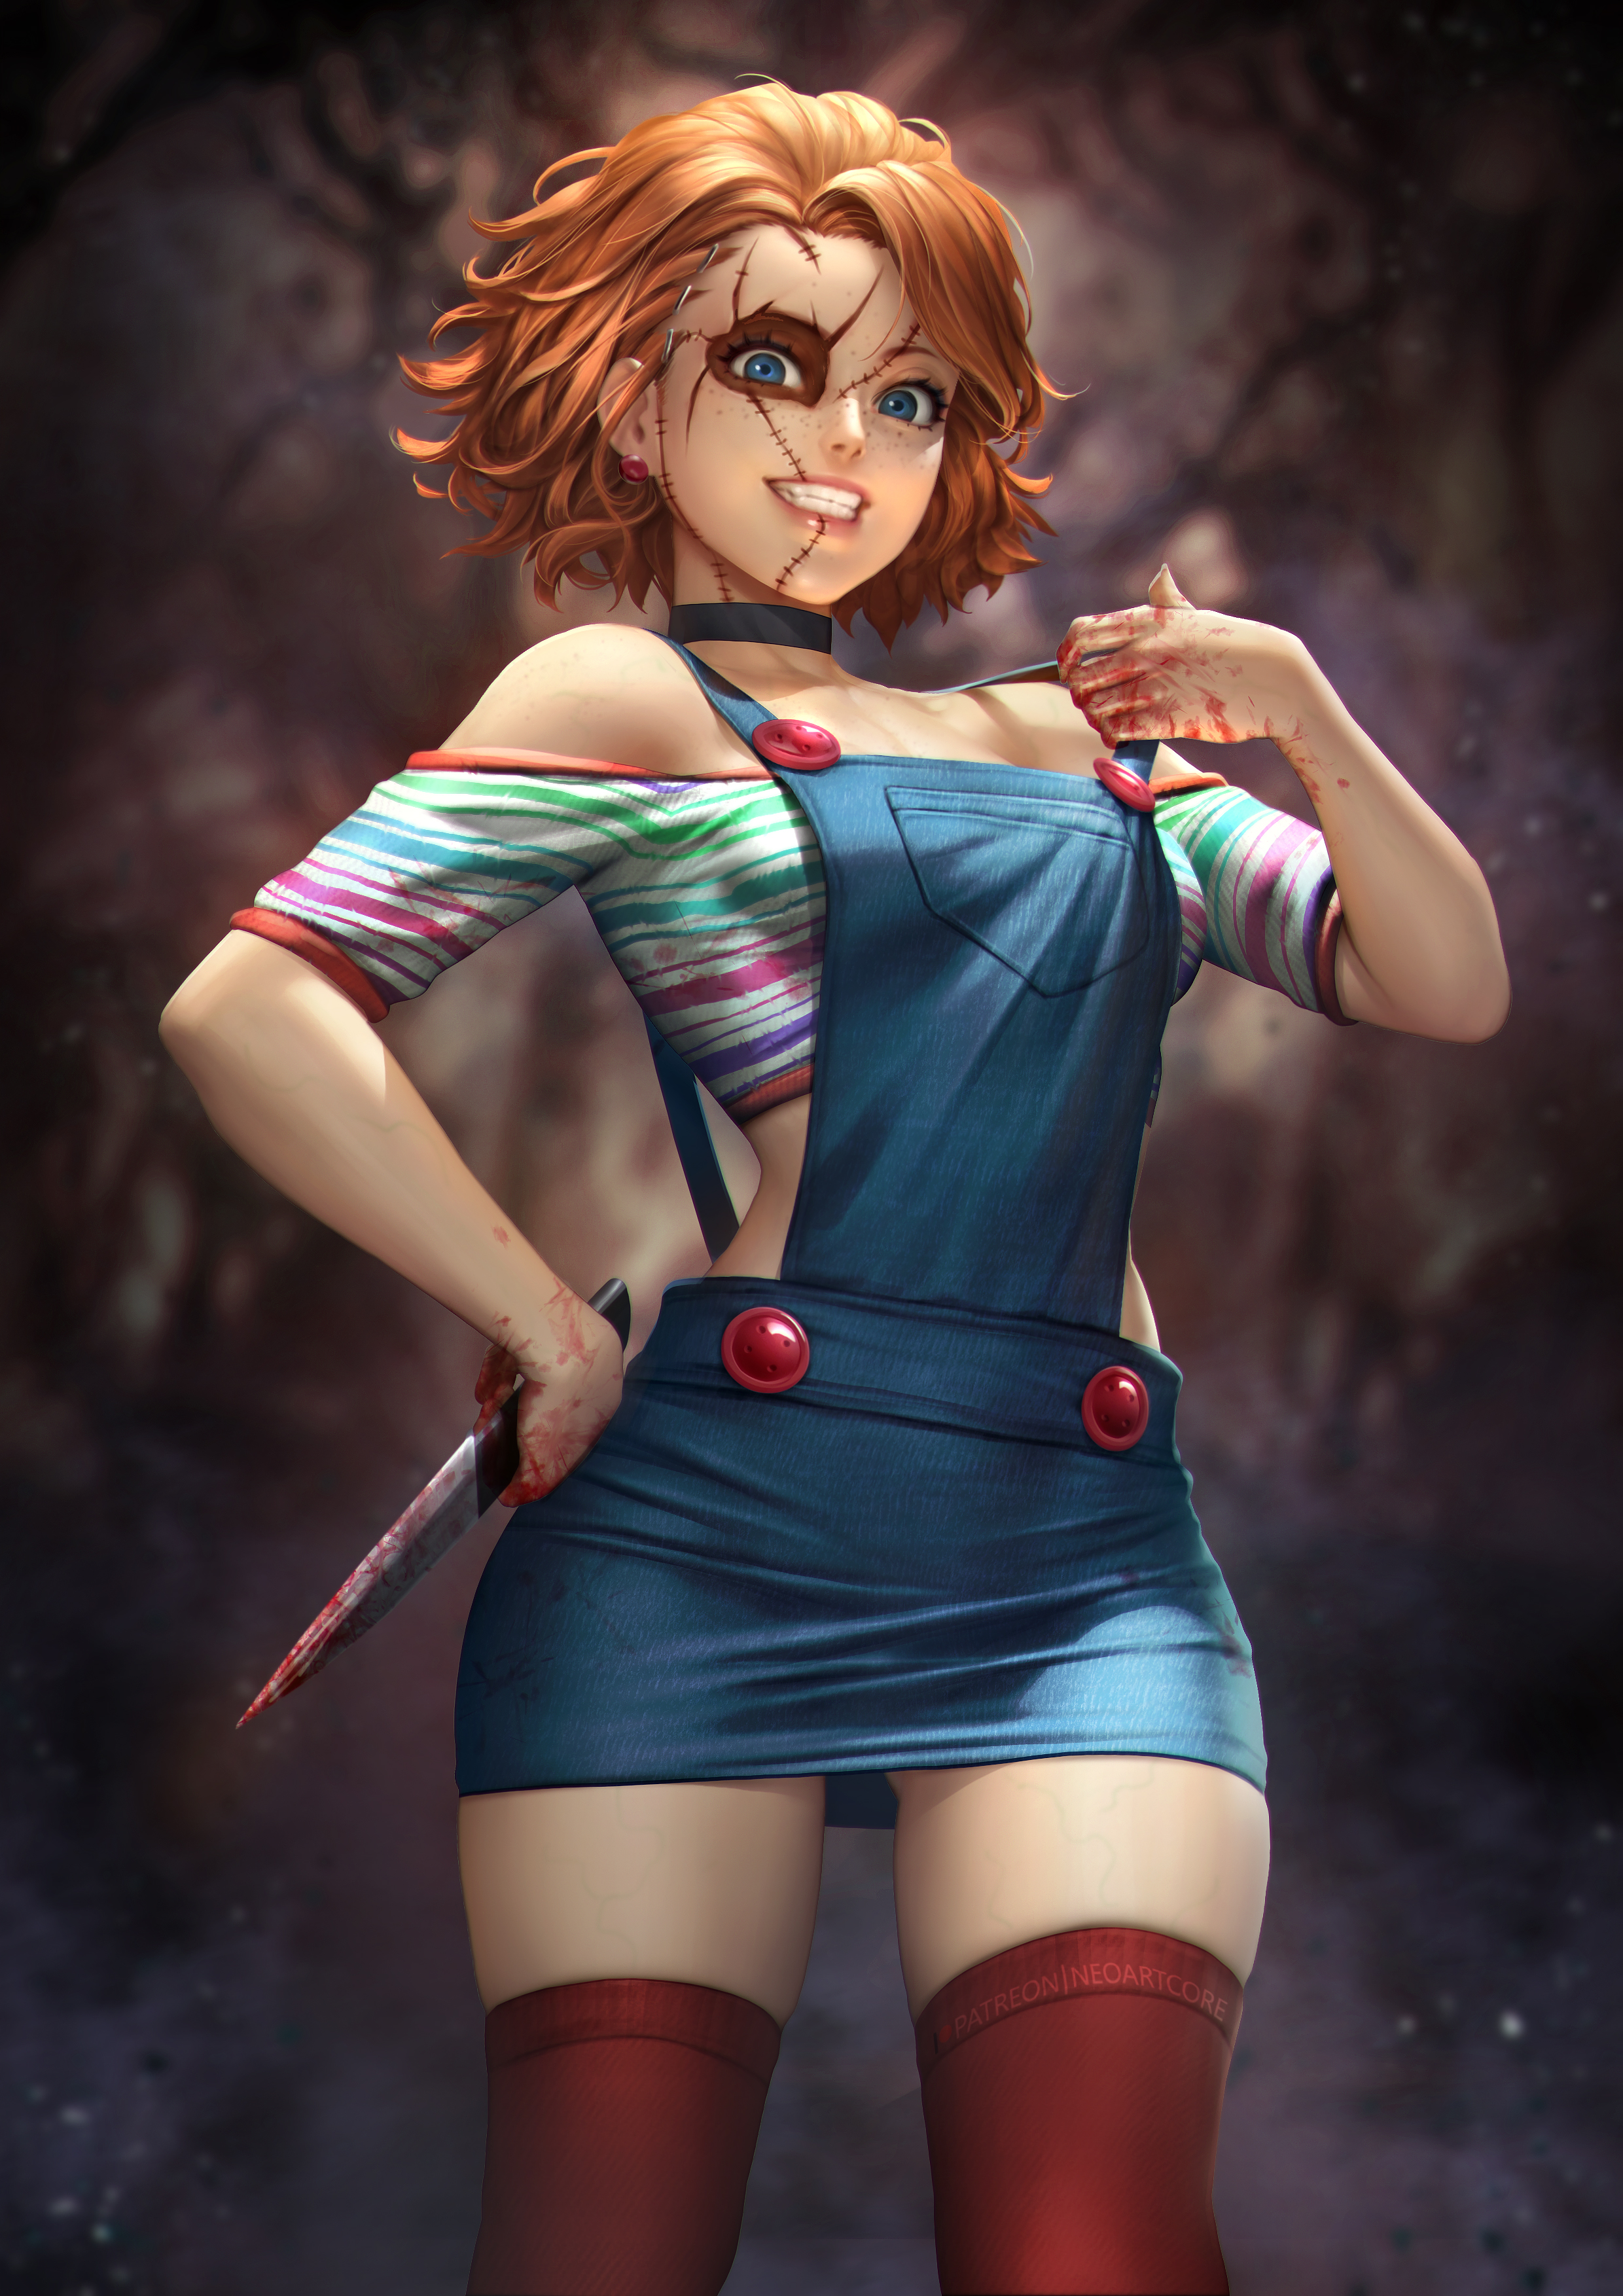 General 2480x3508 Terror movies fantasy girl fan art women redhead long hair scars blue eyes looking at viewer smiling choker knife blood bare shoulders striped tops overalls miniskirt the gap thigh-highs low-angle weapon Halloween artwork drawing digital art illustration NeoArtCorE (artist) Chucky freckles portrait display depth of field petite